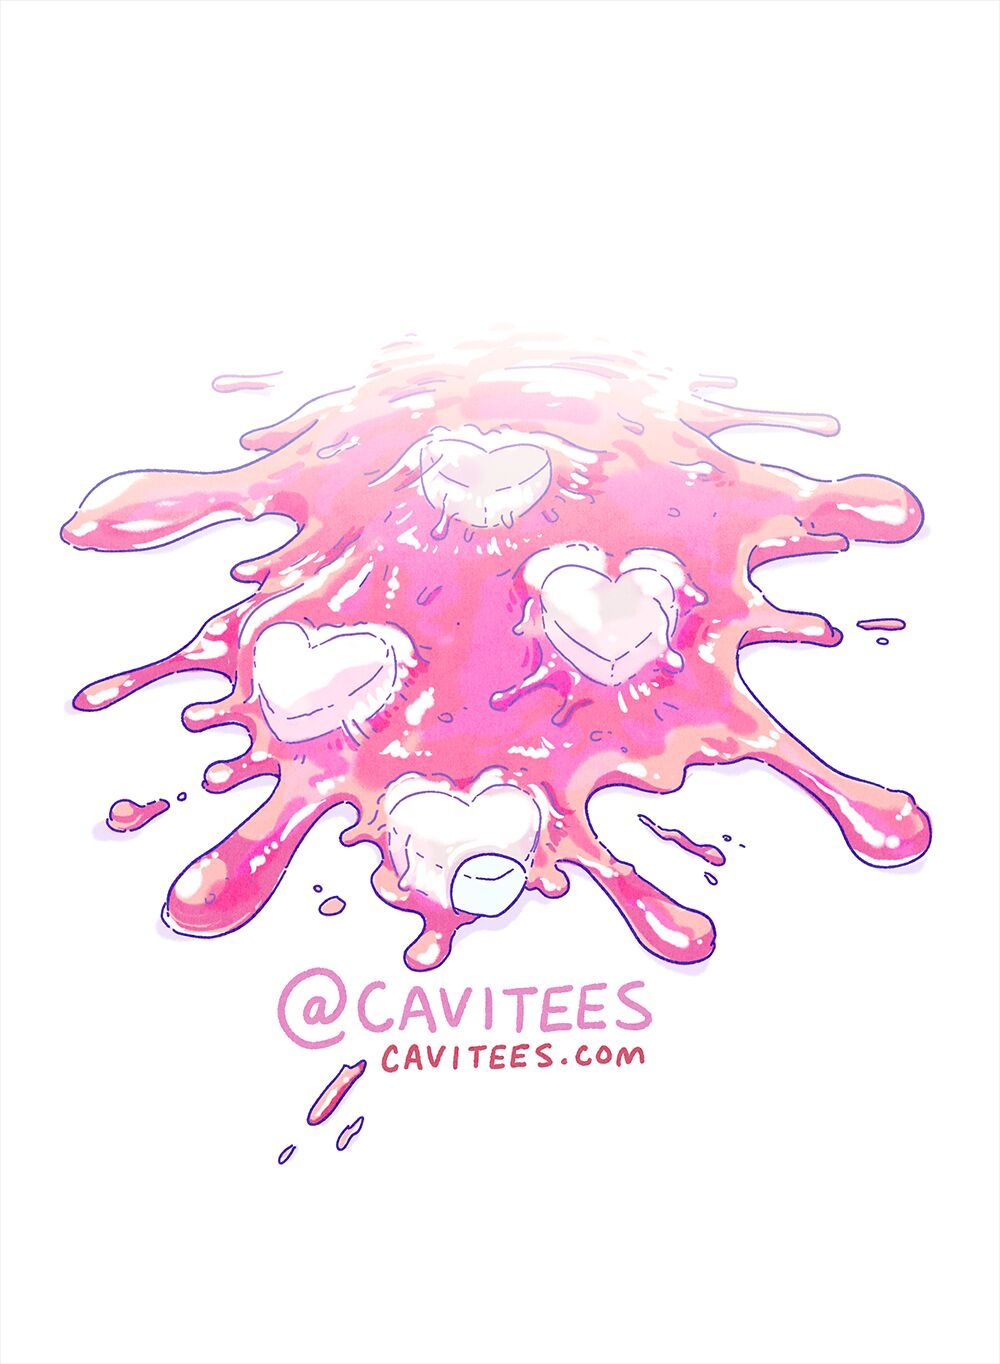 [Cavitees] Leftover Candy 8